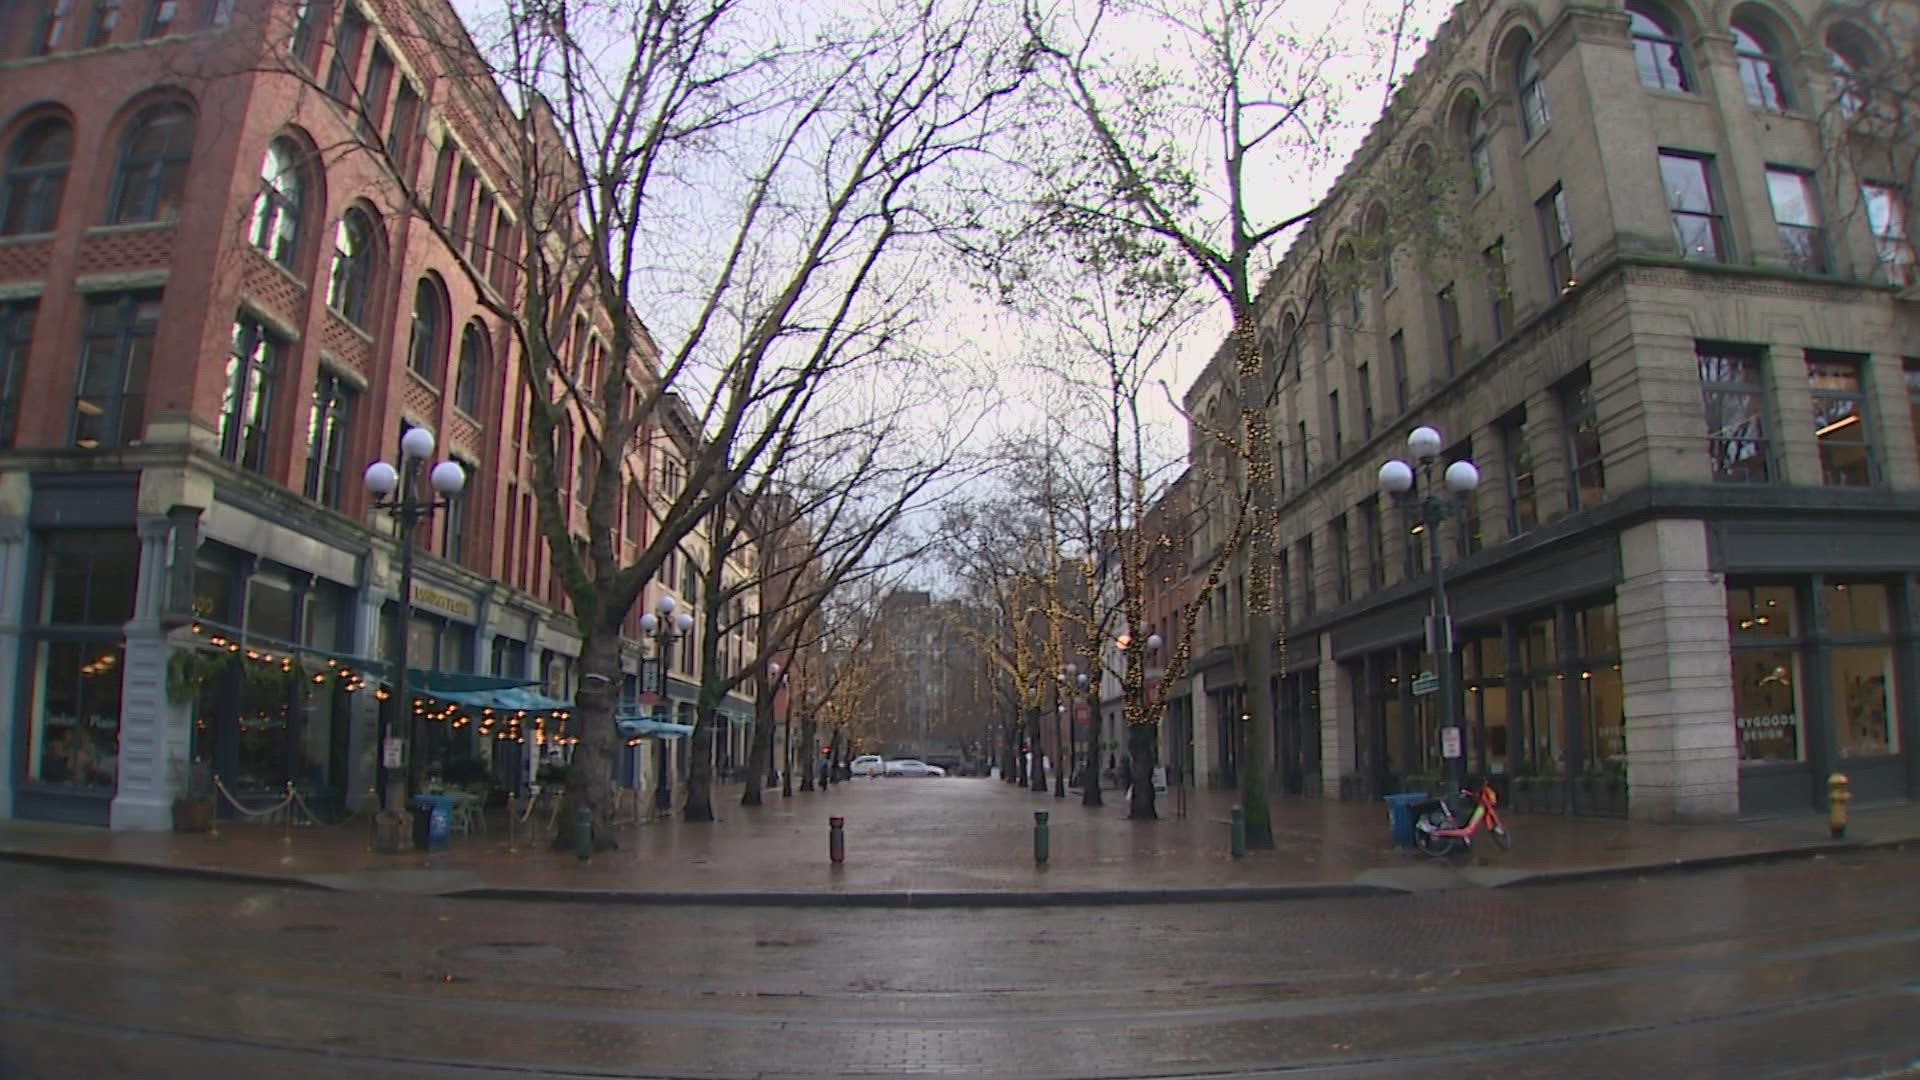 SPD data shows crime increasing in the neighborhood throughout 2021, however, Pioneer Square regulars are mixed on whether the area actually needs more policing.